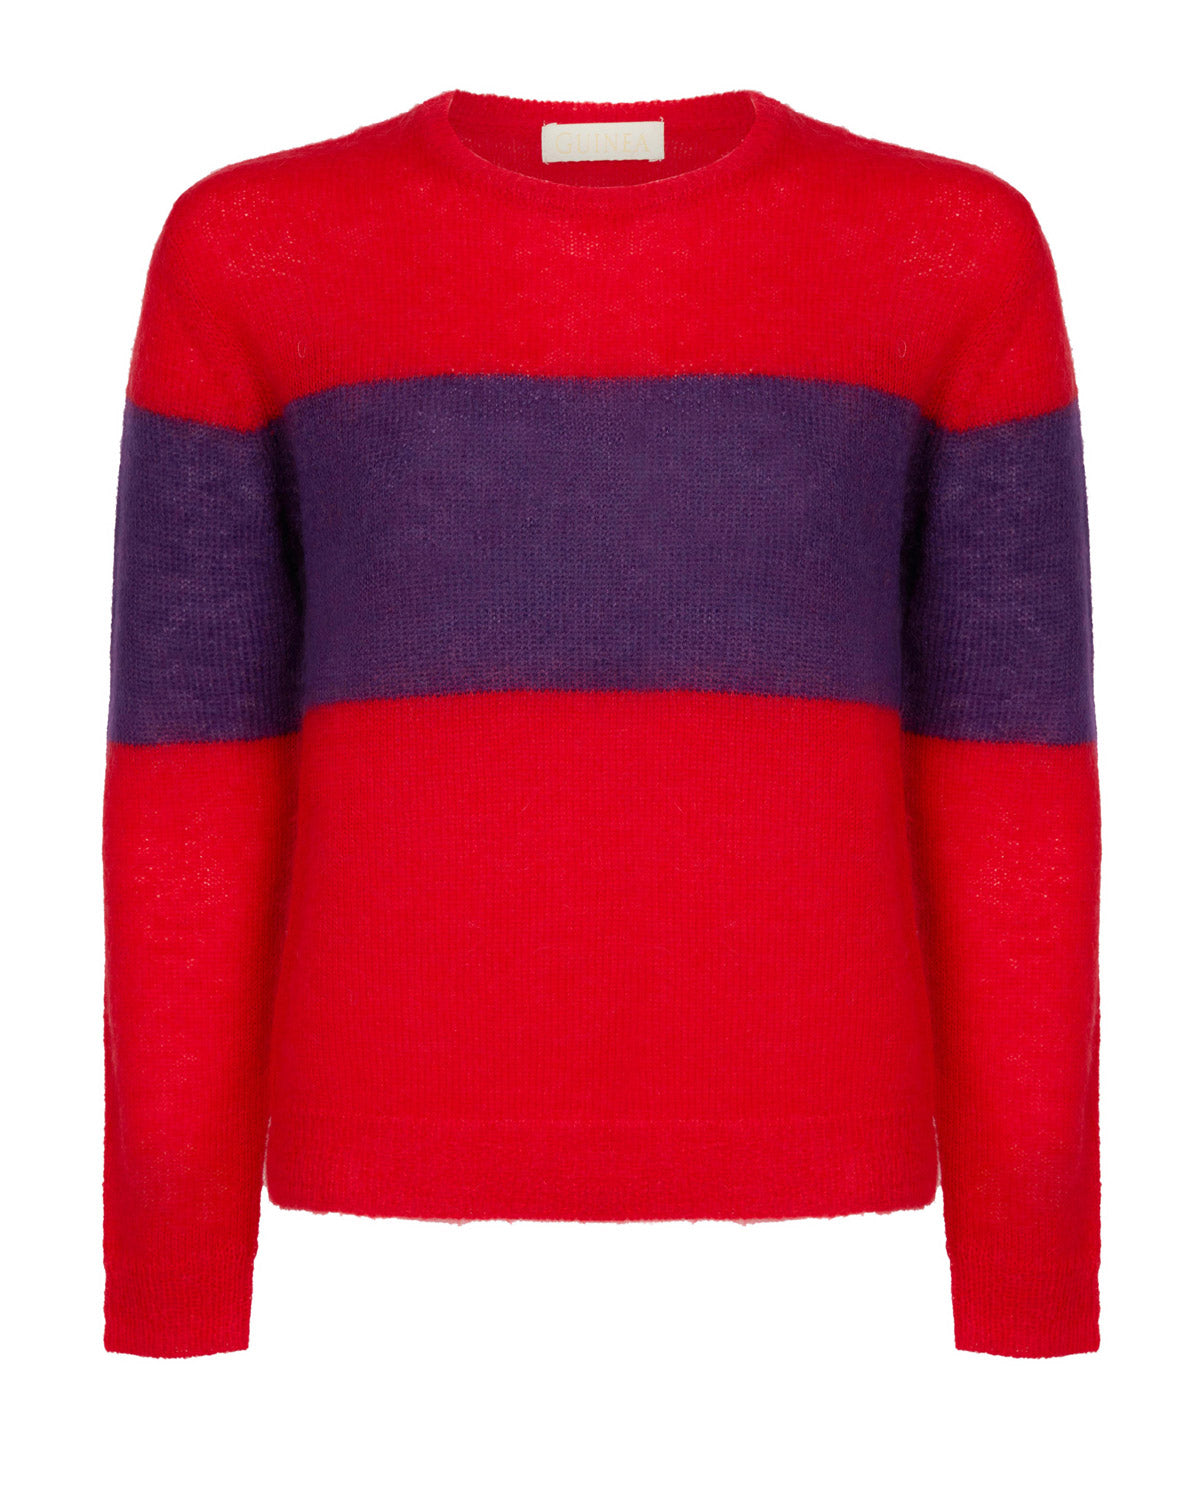 Milly - Red Mohair Jumper - 50% OFF